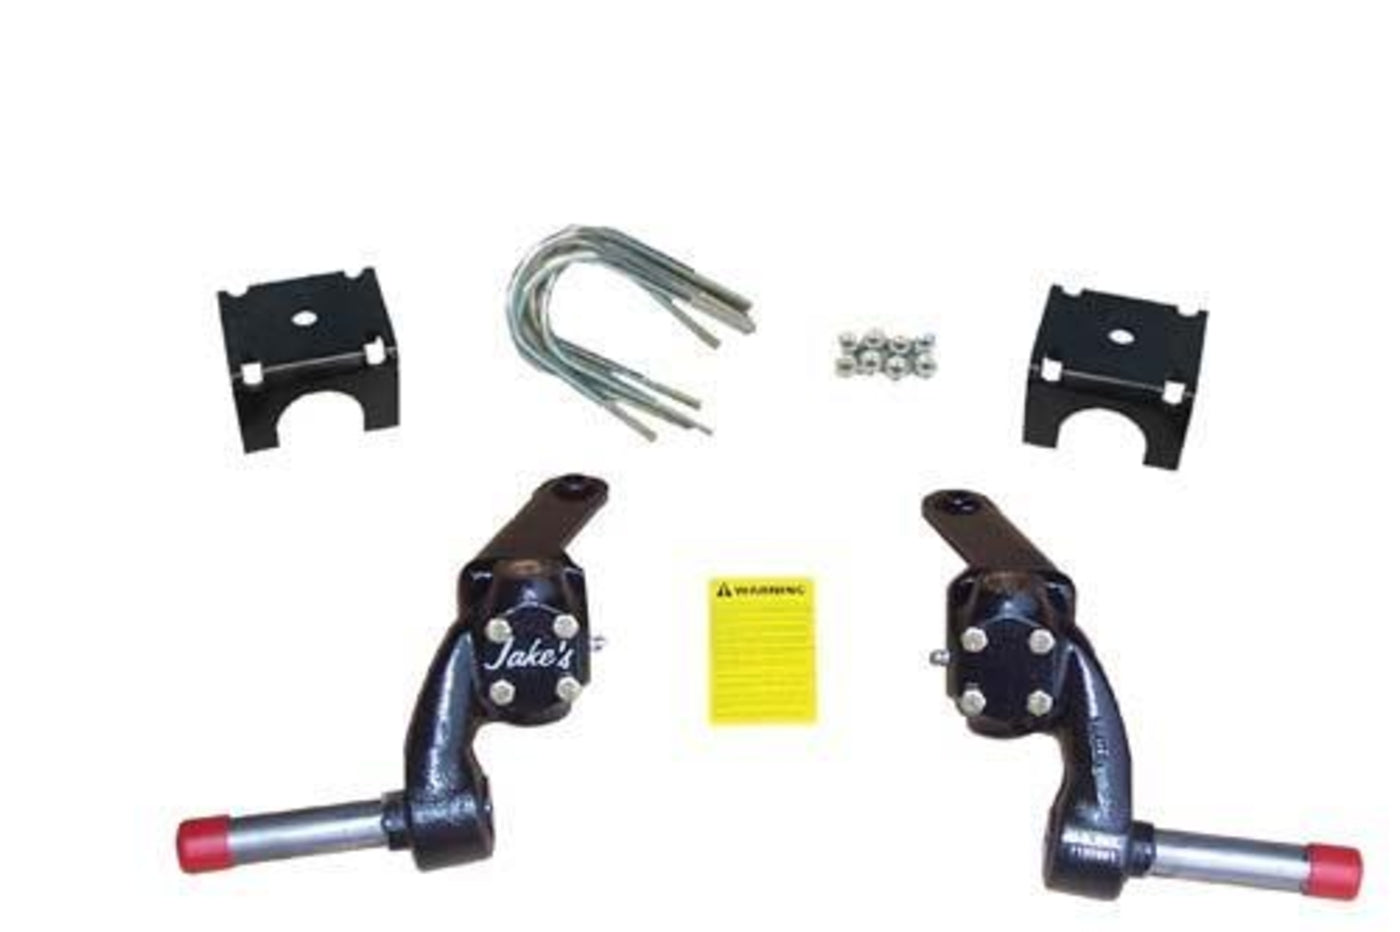 Jake's E-Z-GO Medalist / TXT Gas 3 Spindle Lift Kit (Years 1994.5-2001.5)